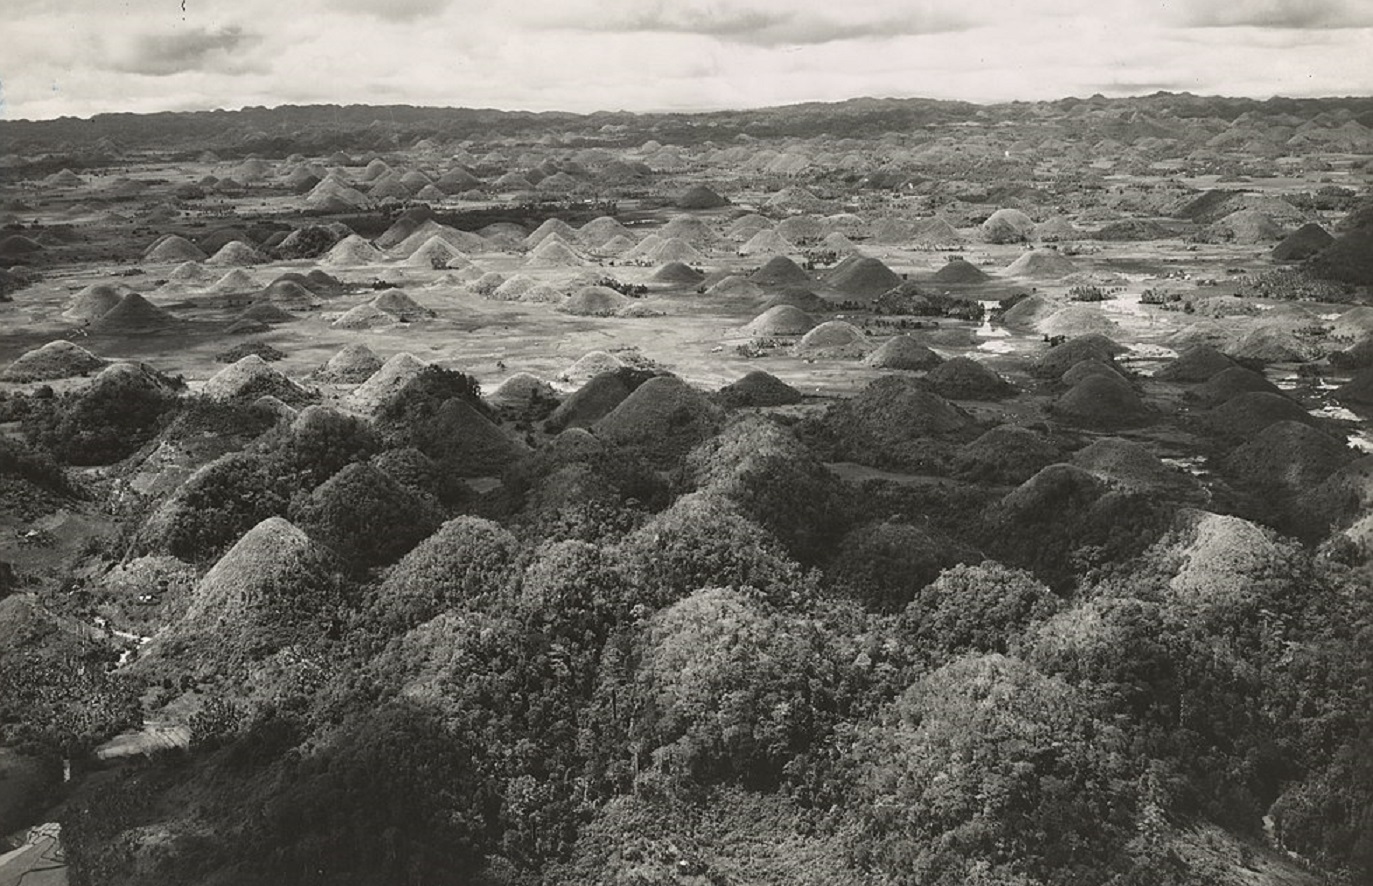 <p>The formation of the Chocolate Hills dates back to the Late Pilocene era, <strong>more than 2.5 million years ago</strong>. Because of this, the limestone deposits in the hills are full of marine fossils, like coral, mollusks, and algae.</p>